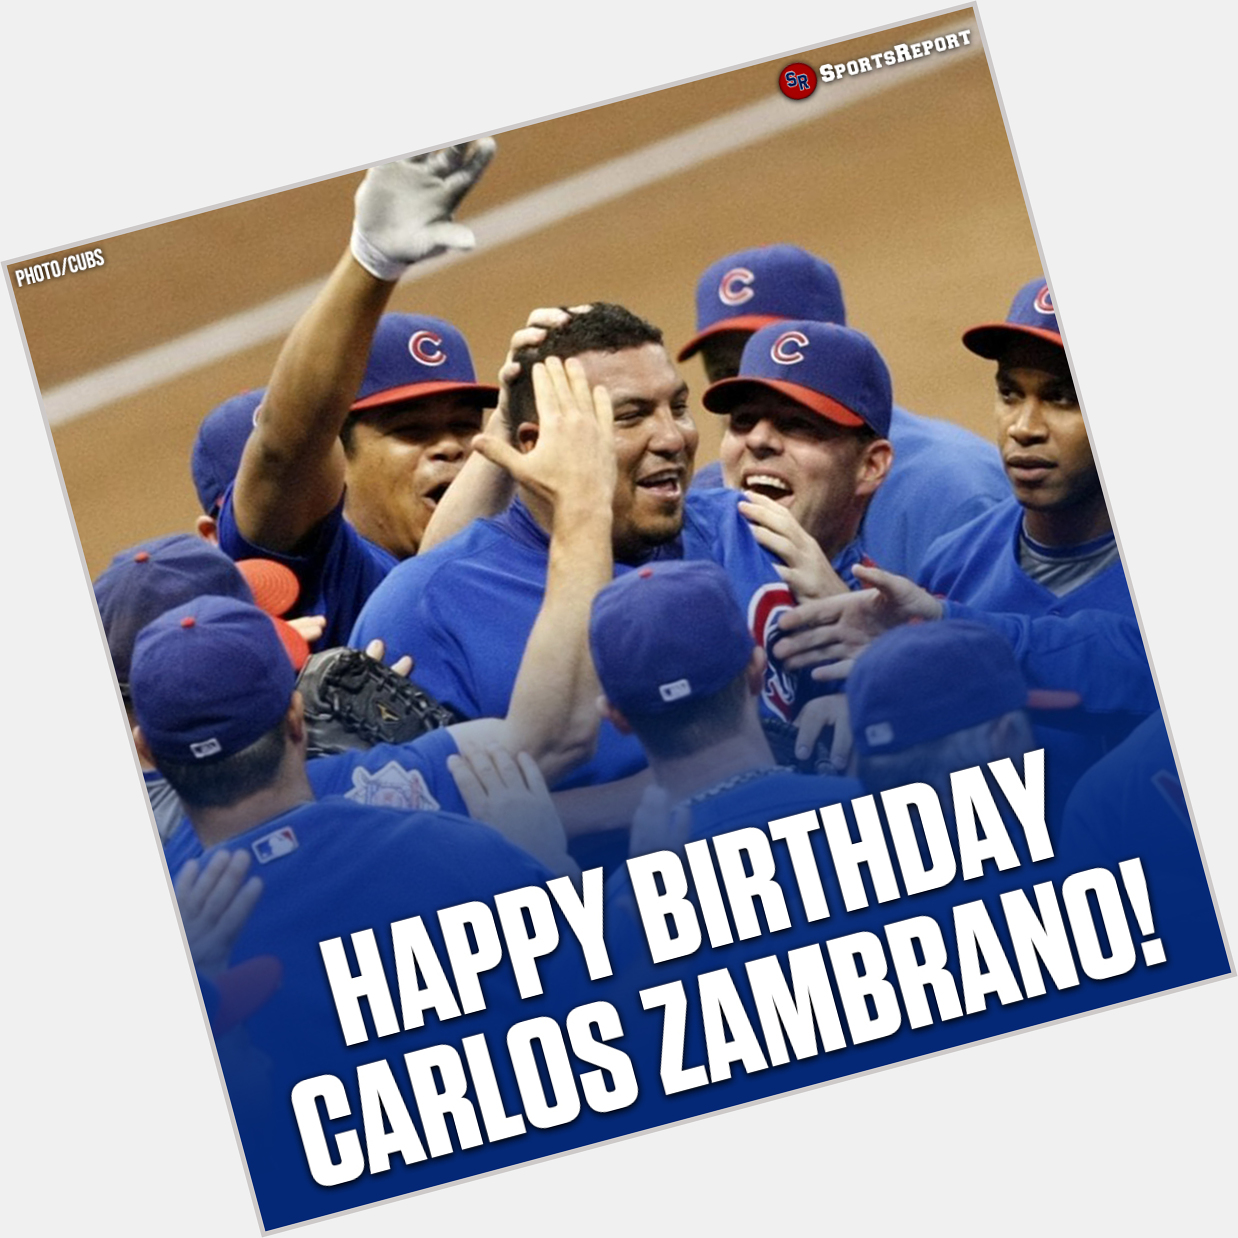 Cubs Fans, let\s wish great Carlos Zambrano a Happy Birthday! 